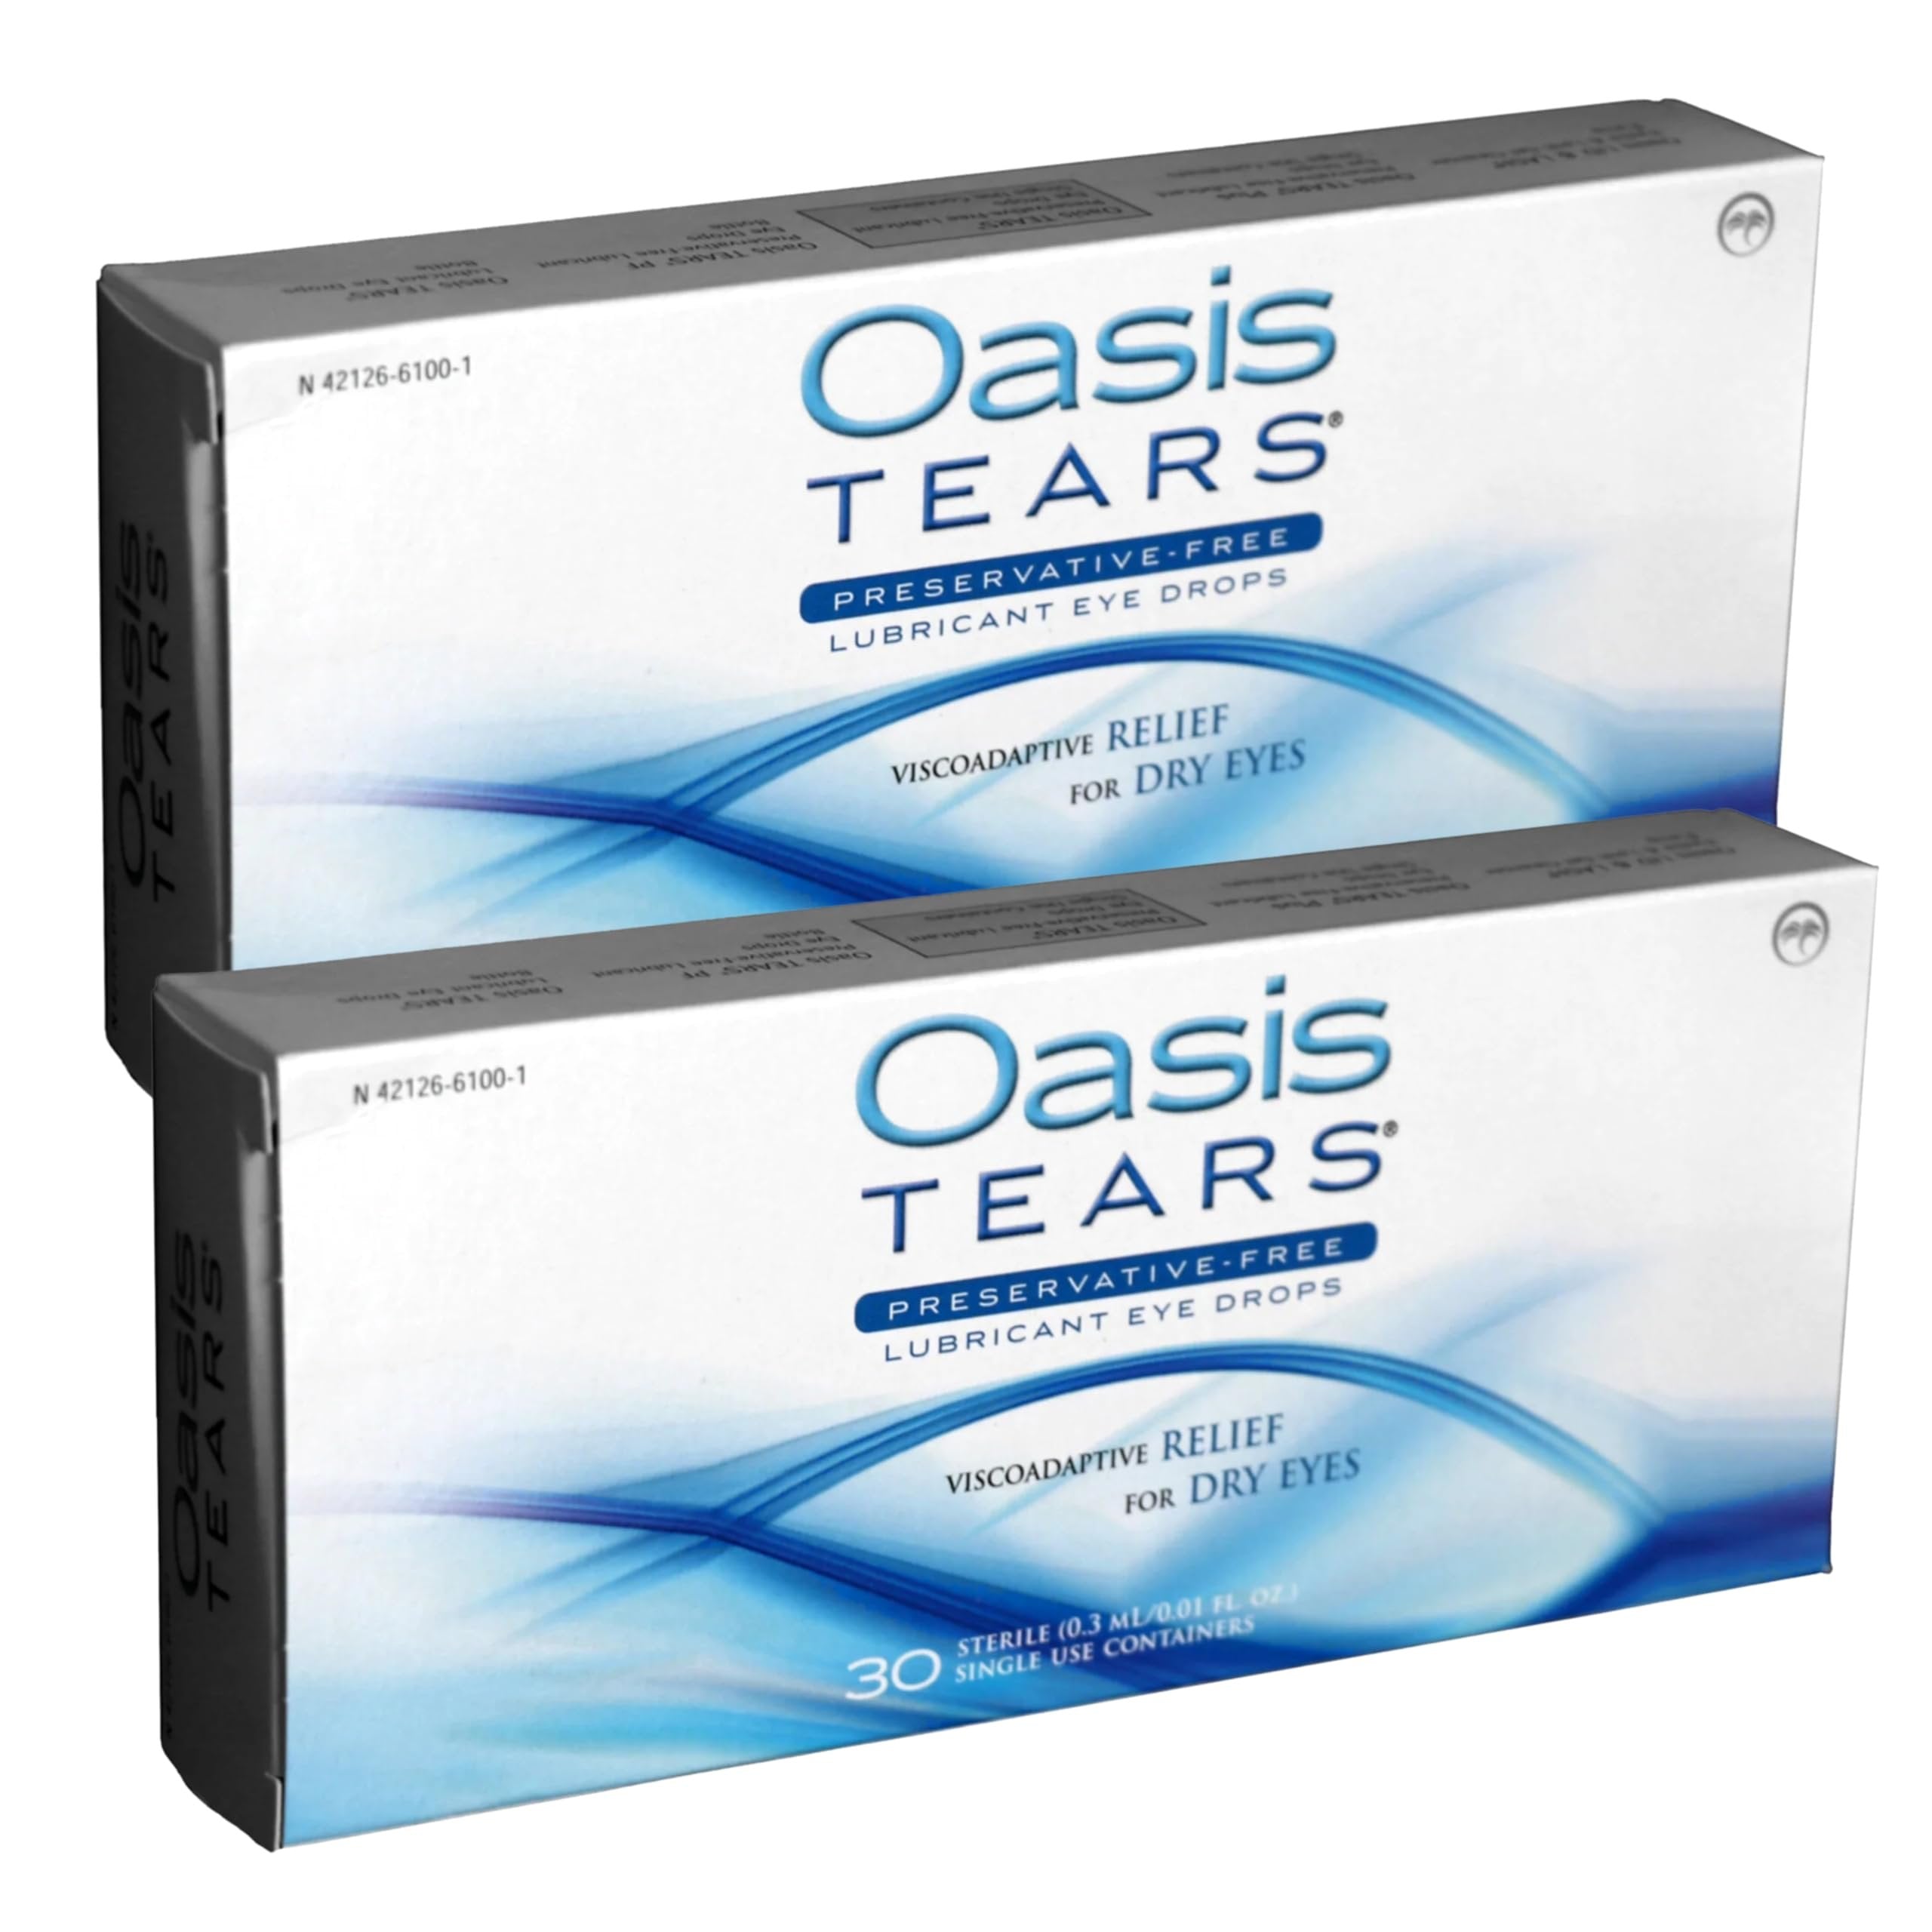 Oasis TEARS Original Lubricant Eye Drops Relief for Dry Eyes, Coat, Lubricate, & Moisten Delicate Eye Tissue, Continued Relief of Irritated Eyes 30 Count Box Sterile Disposable Containers (Pack of 2)